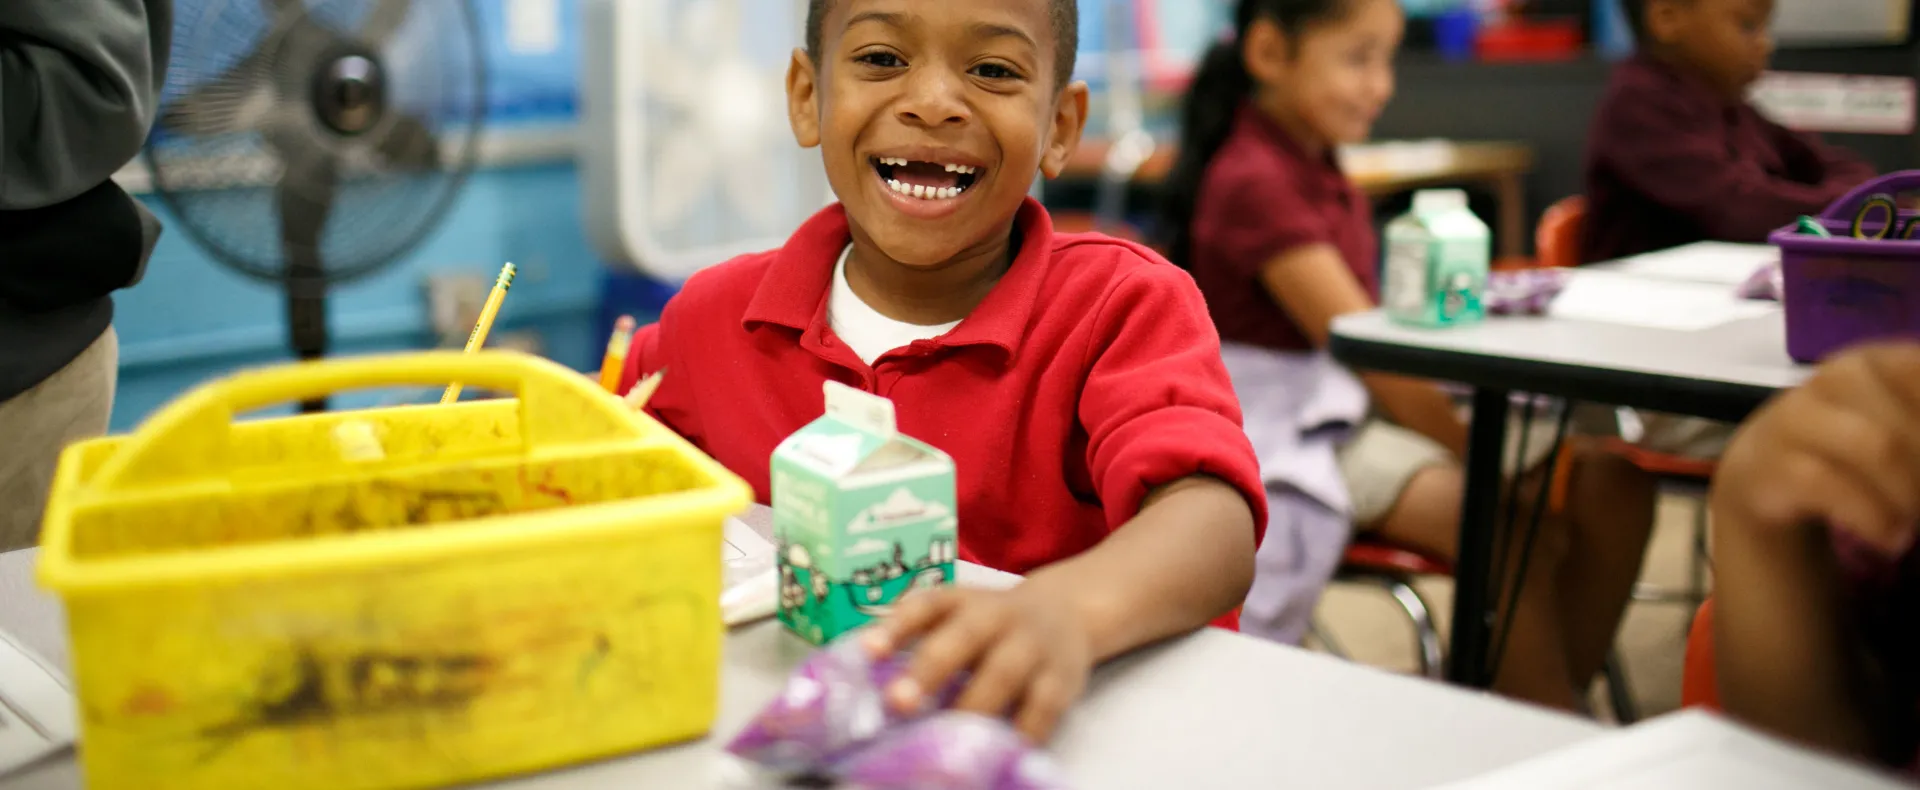 Boy smiling and eating breakfast at his classroom desk